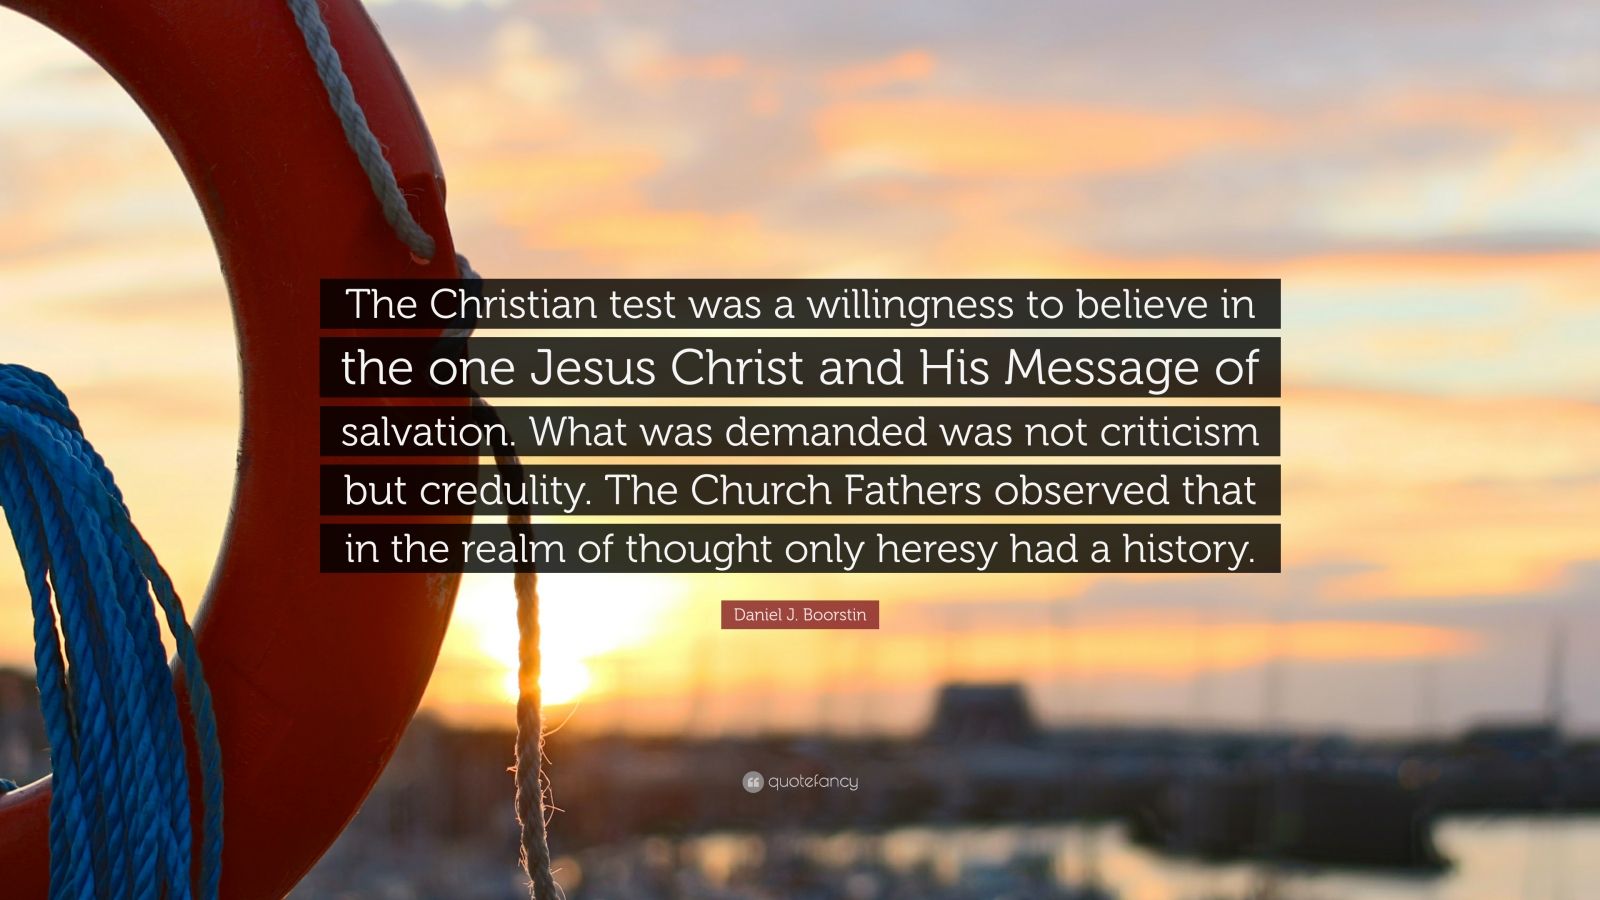 Daniel J. Boorstin Quote “The Christian test was a willingness to